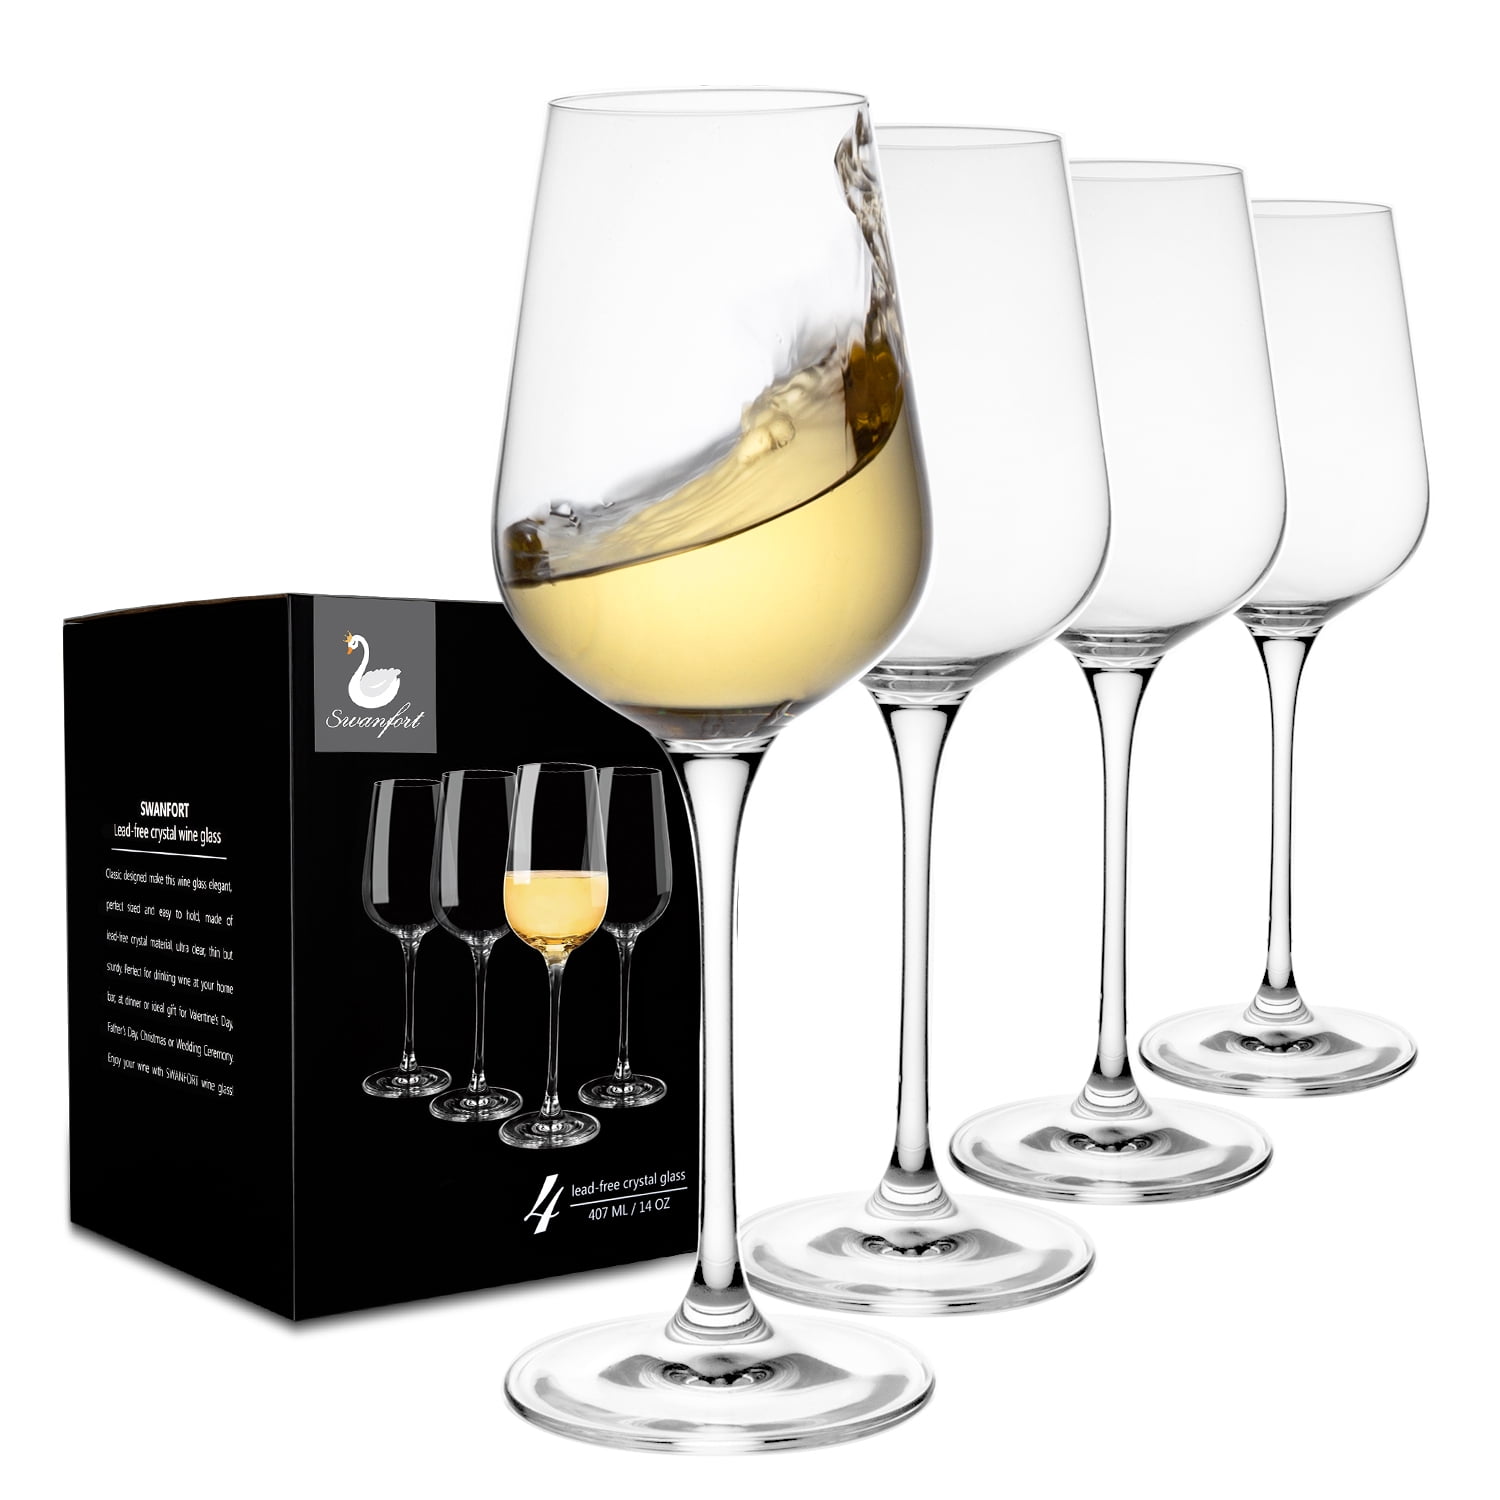 Swanfort Red Wine Glass,Set of 4 with Wine Accessories,Hand Blown Crystal Wine Glass,Lead Free Burgundy Wine Glasses,Premium Stemmed Wine Glasses,Large Bowl Wine Glass Set in Gift Box-340 ml